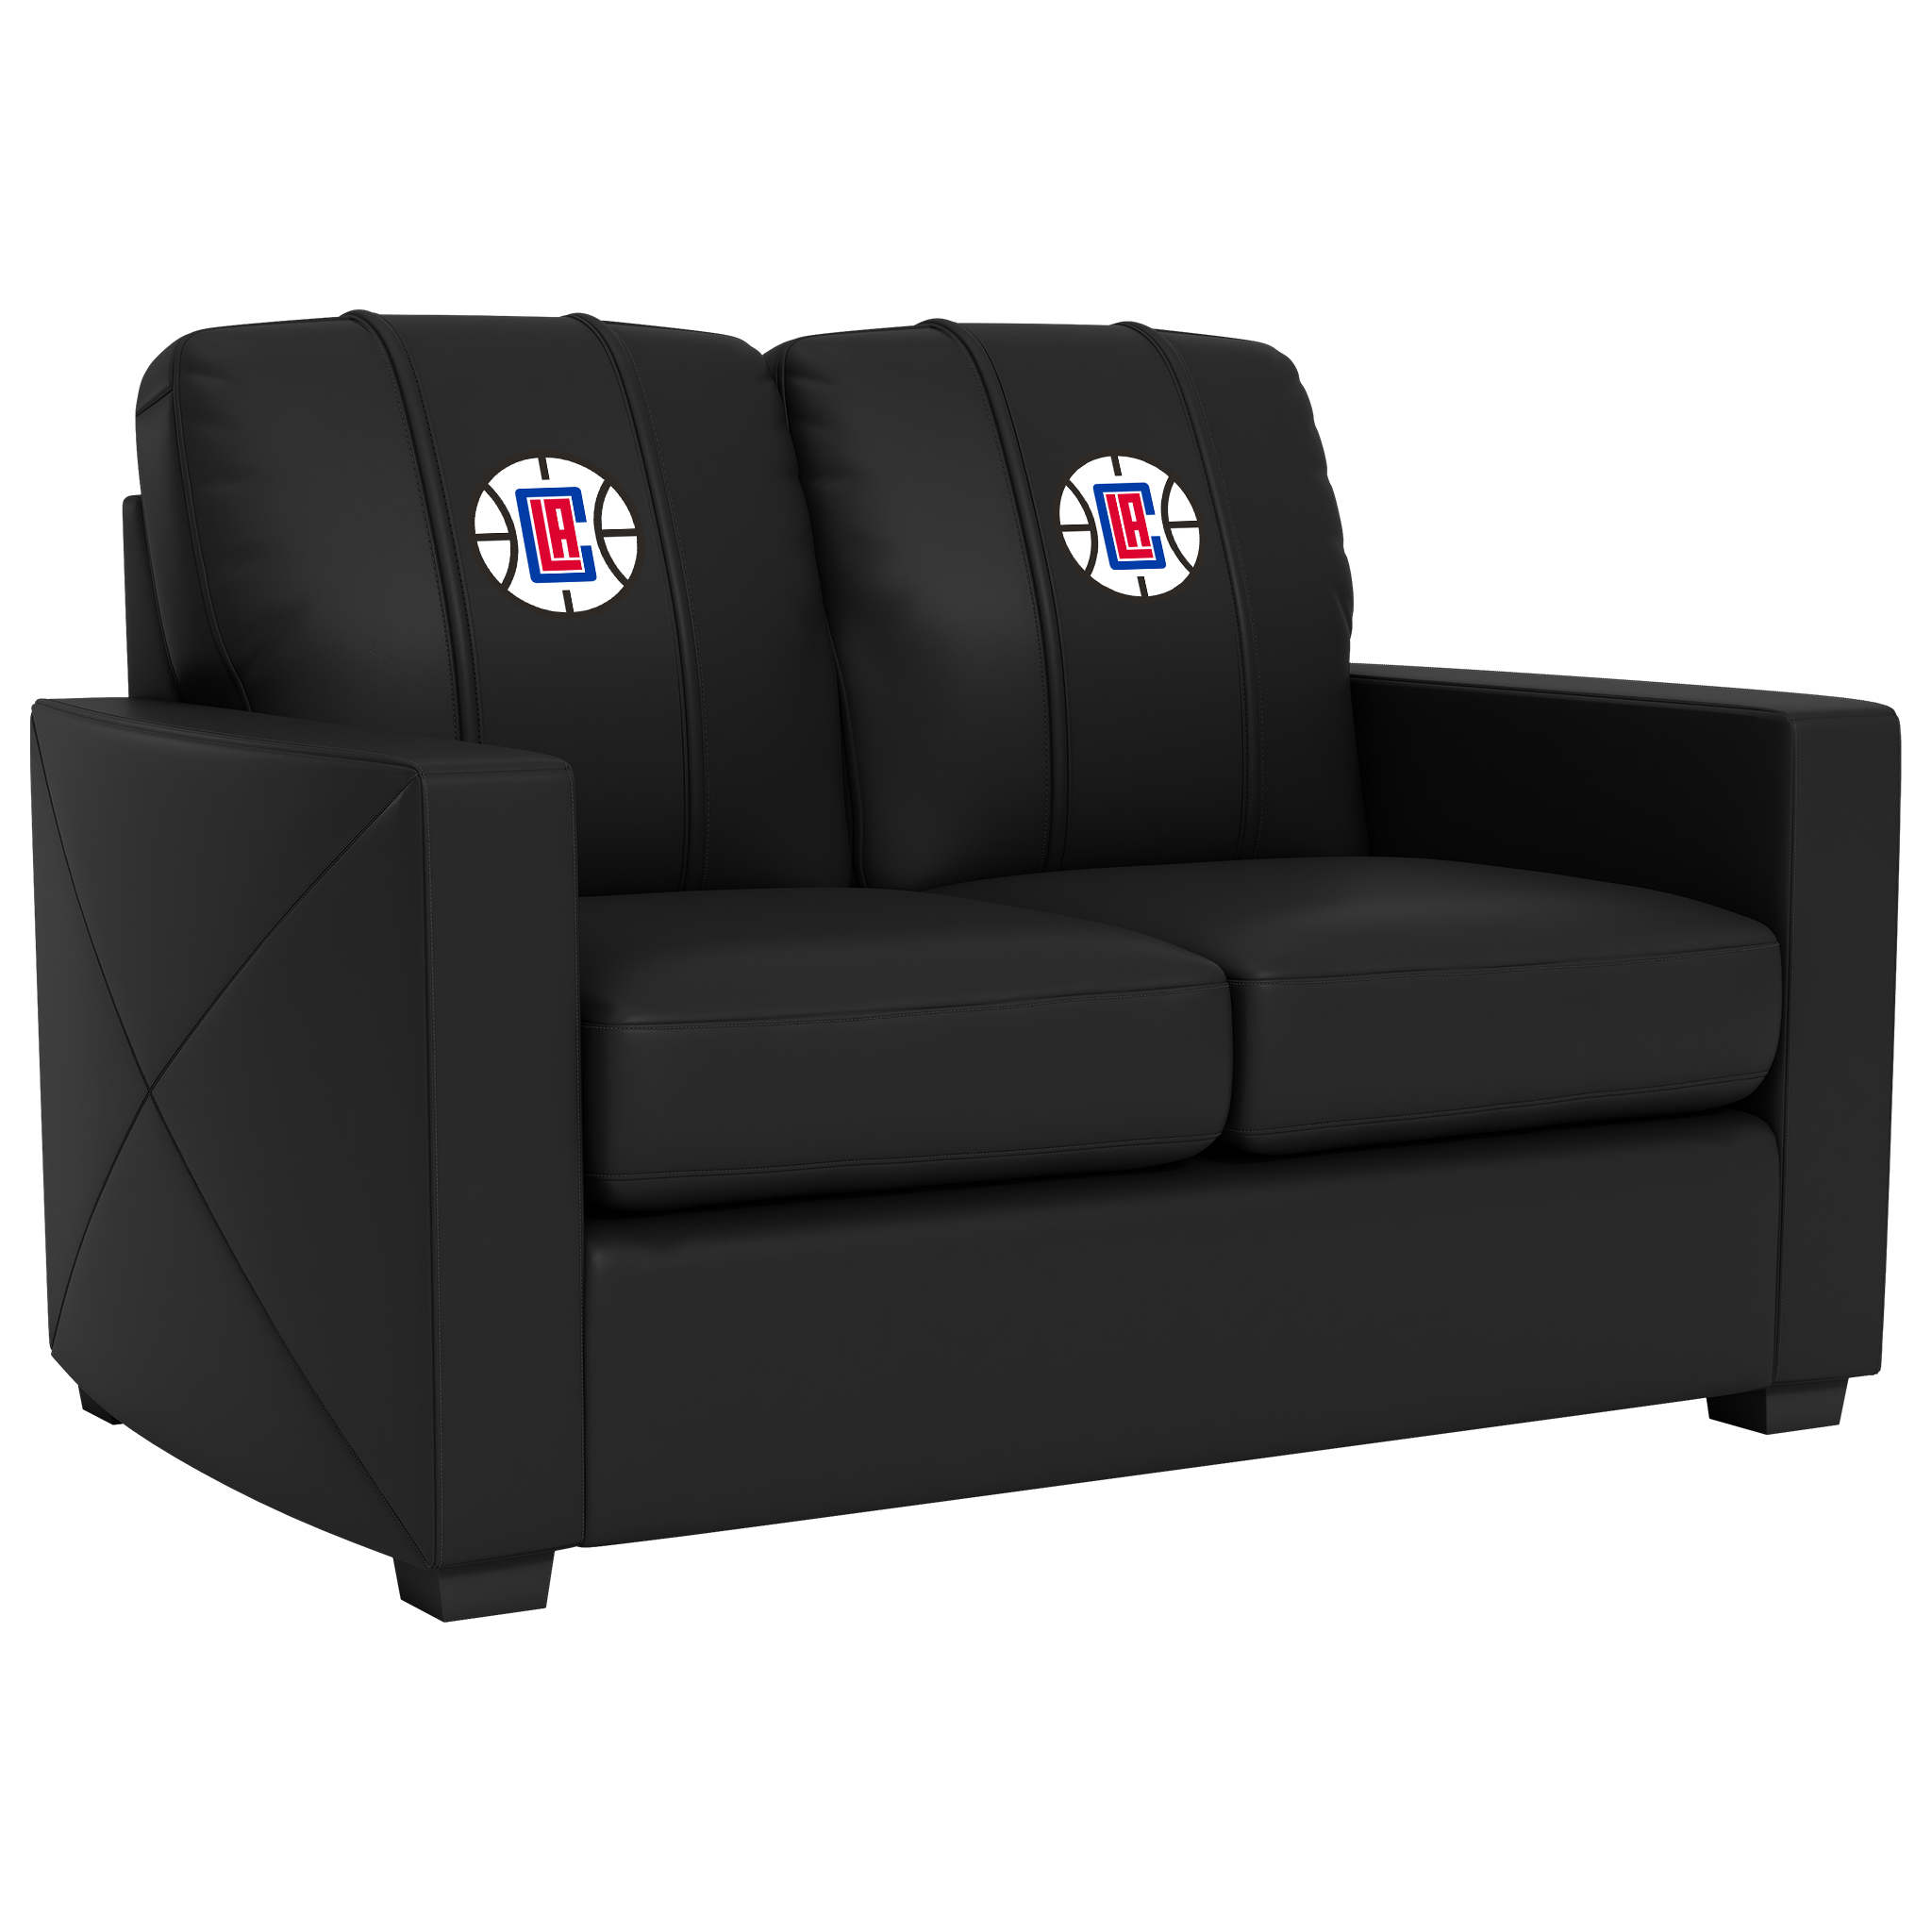 Los Angeles Clippers Silver Loveseat with Los Angeles Clippers Primary